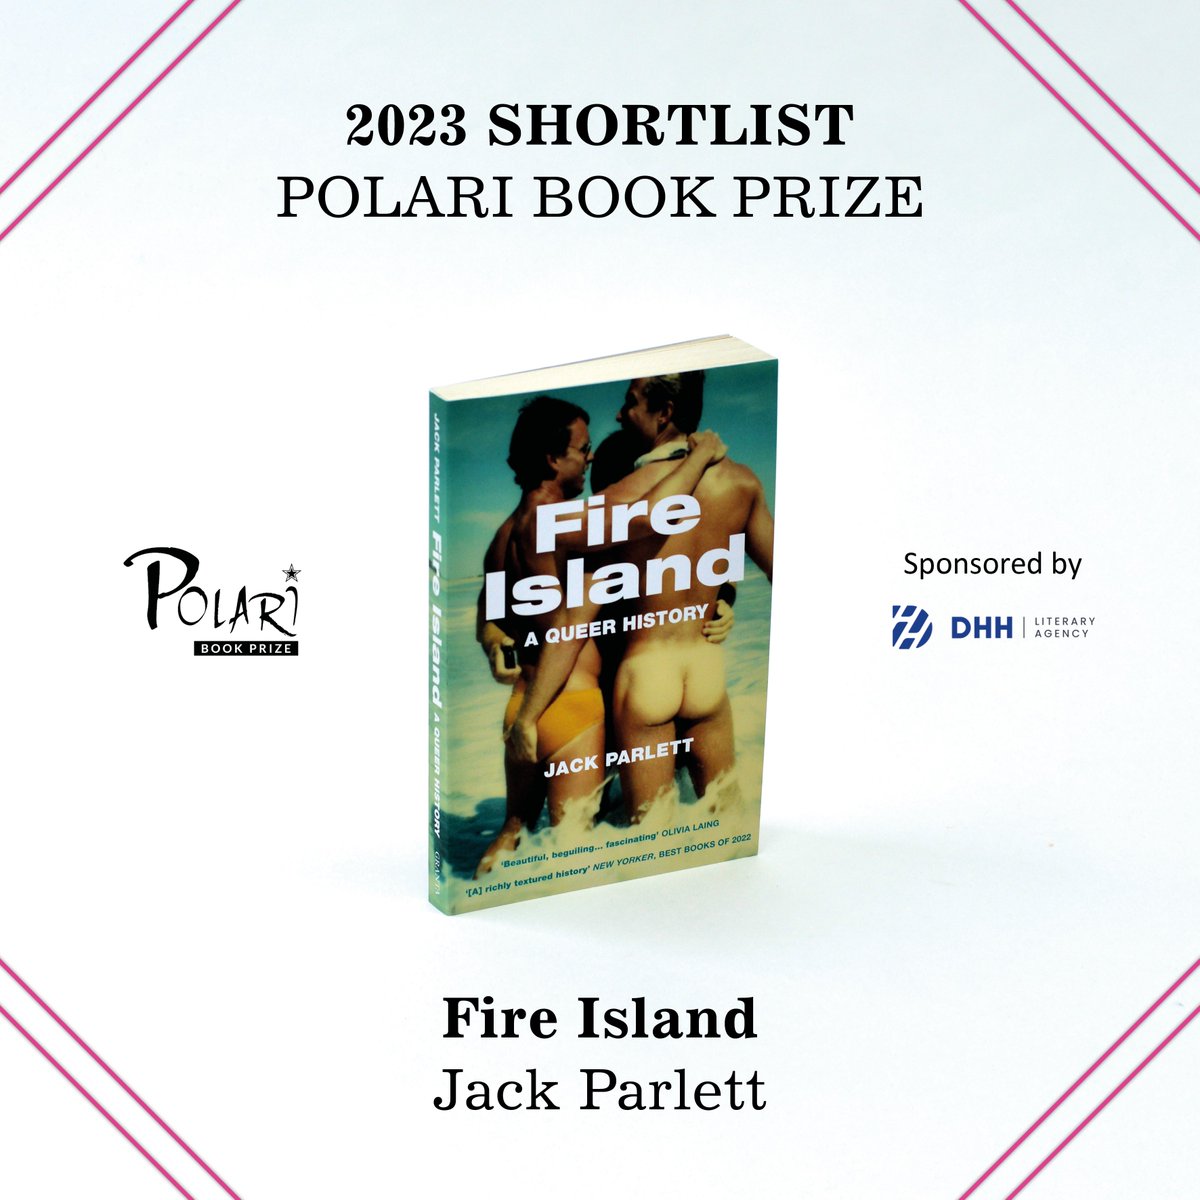 The next title in our #PolariPrize shortlist spotlight is ‘Fire Island’ by Jack Parlett (@jvjparlett), published by @GrantaBooks. “A glancing yet trenchant meditation on community and sexuality.” – @CampMarmalade for @nytimes Read the full review here: nytimes.com/2022/06/07/boo…